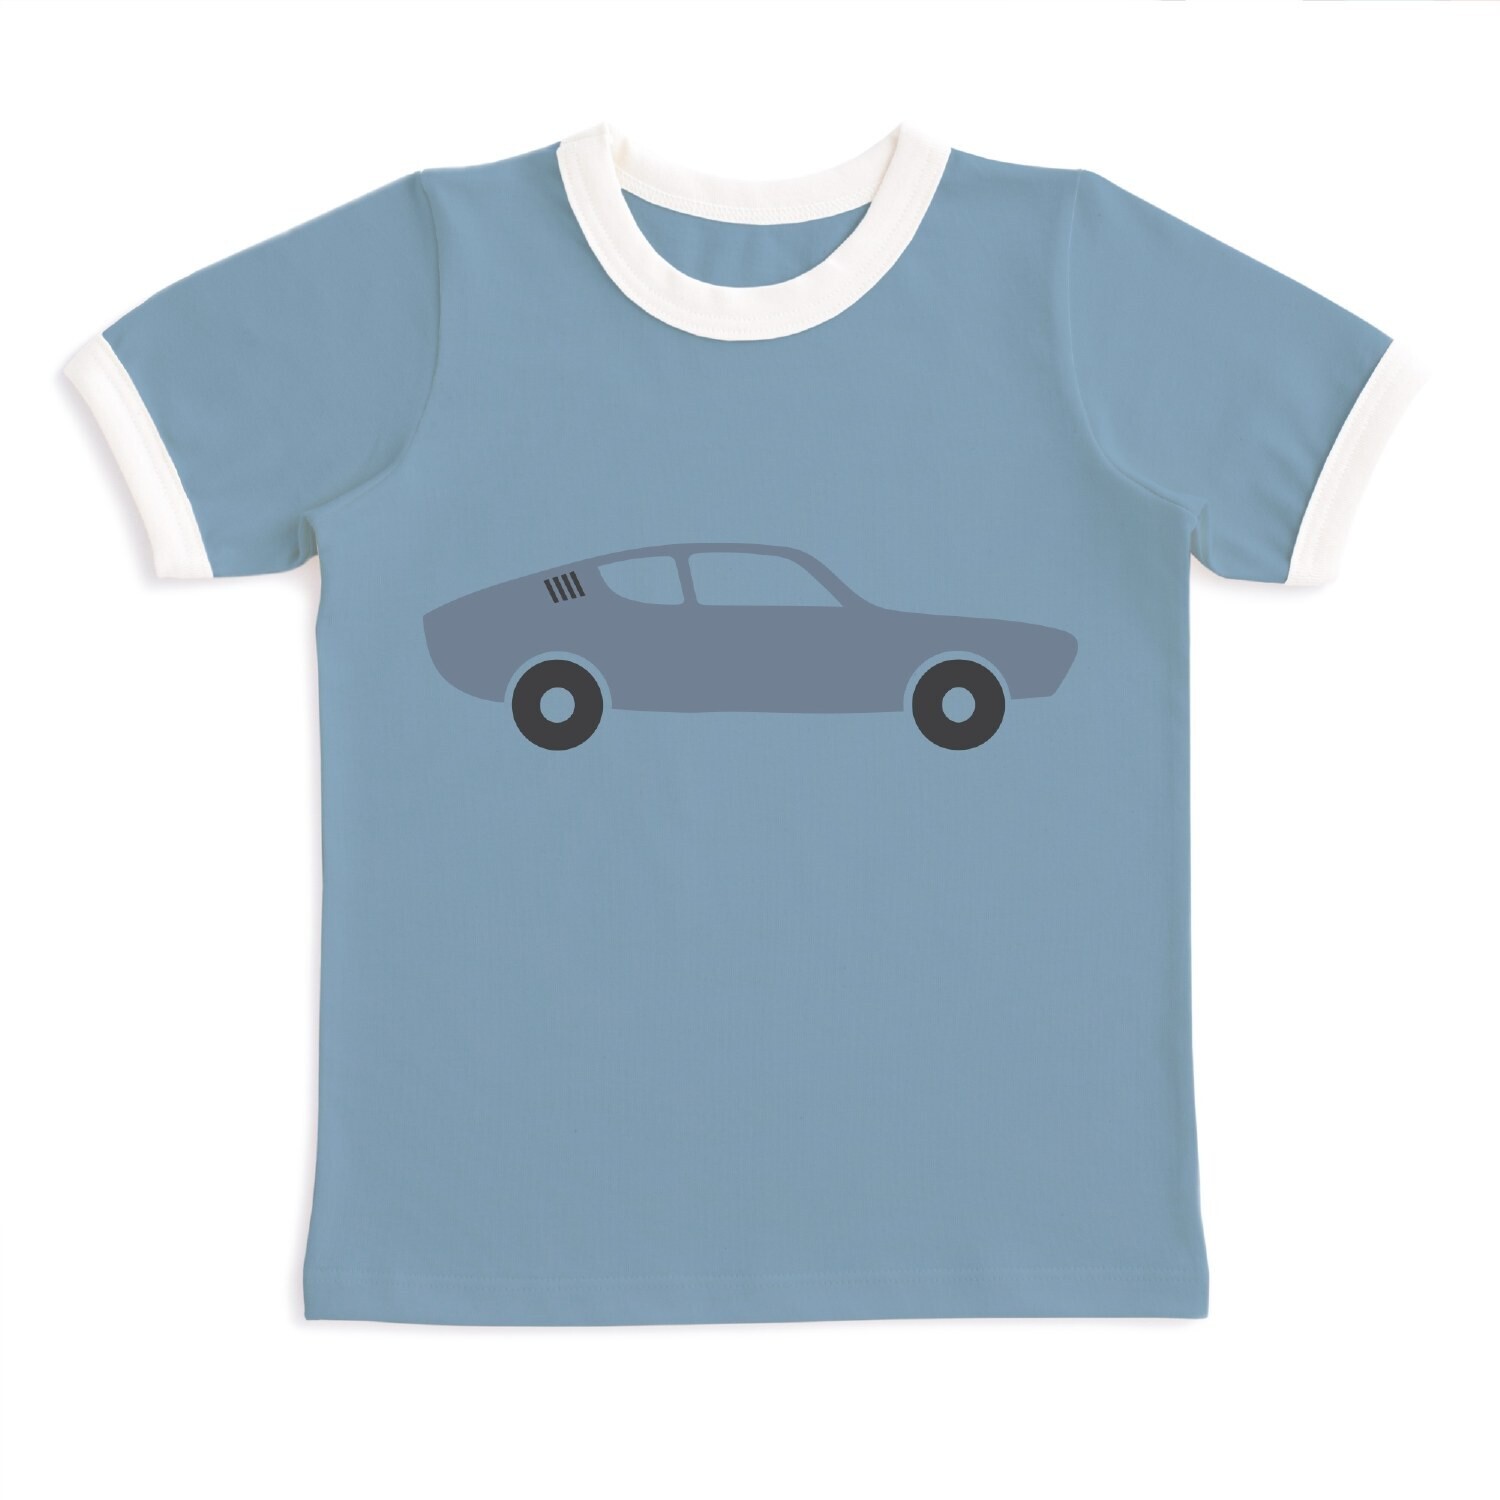 SS Graphic Tee Vintage Car 